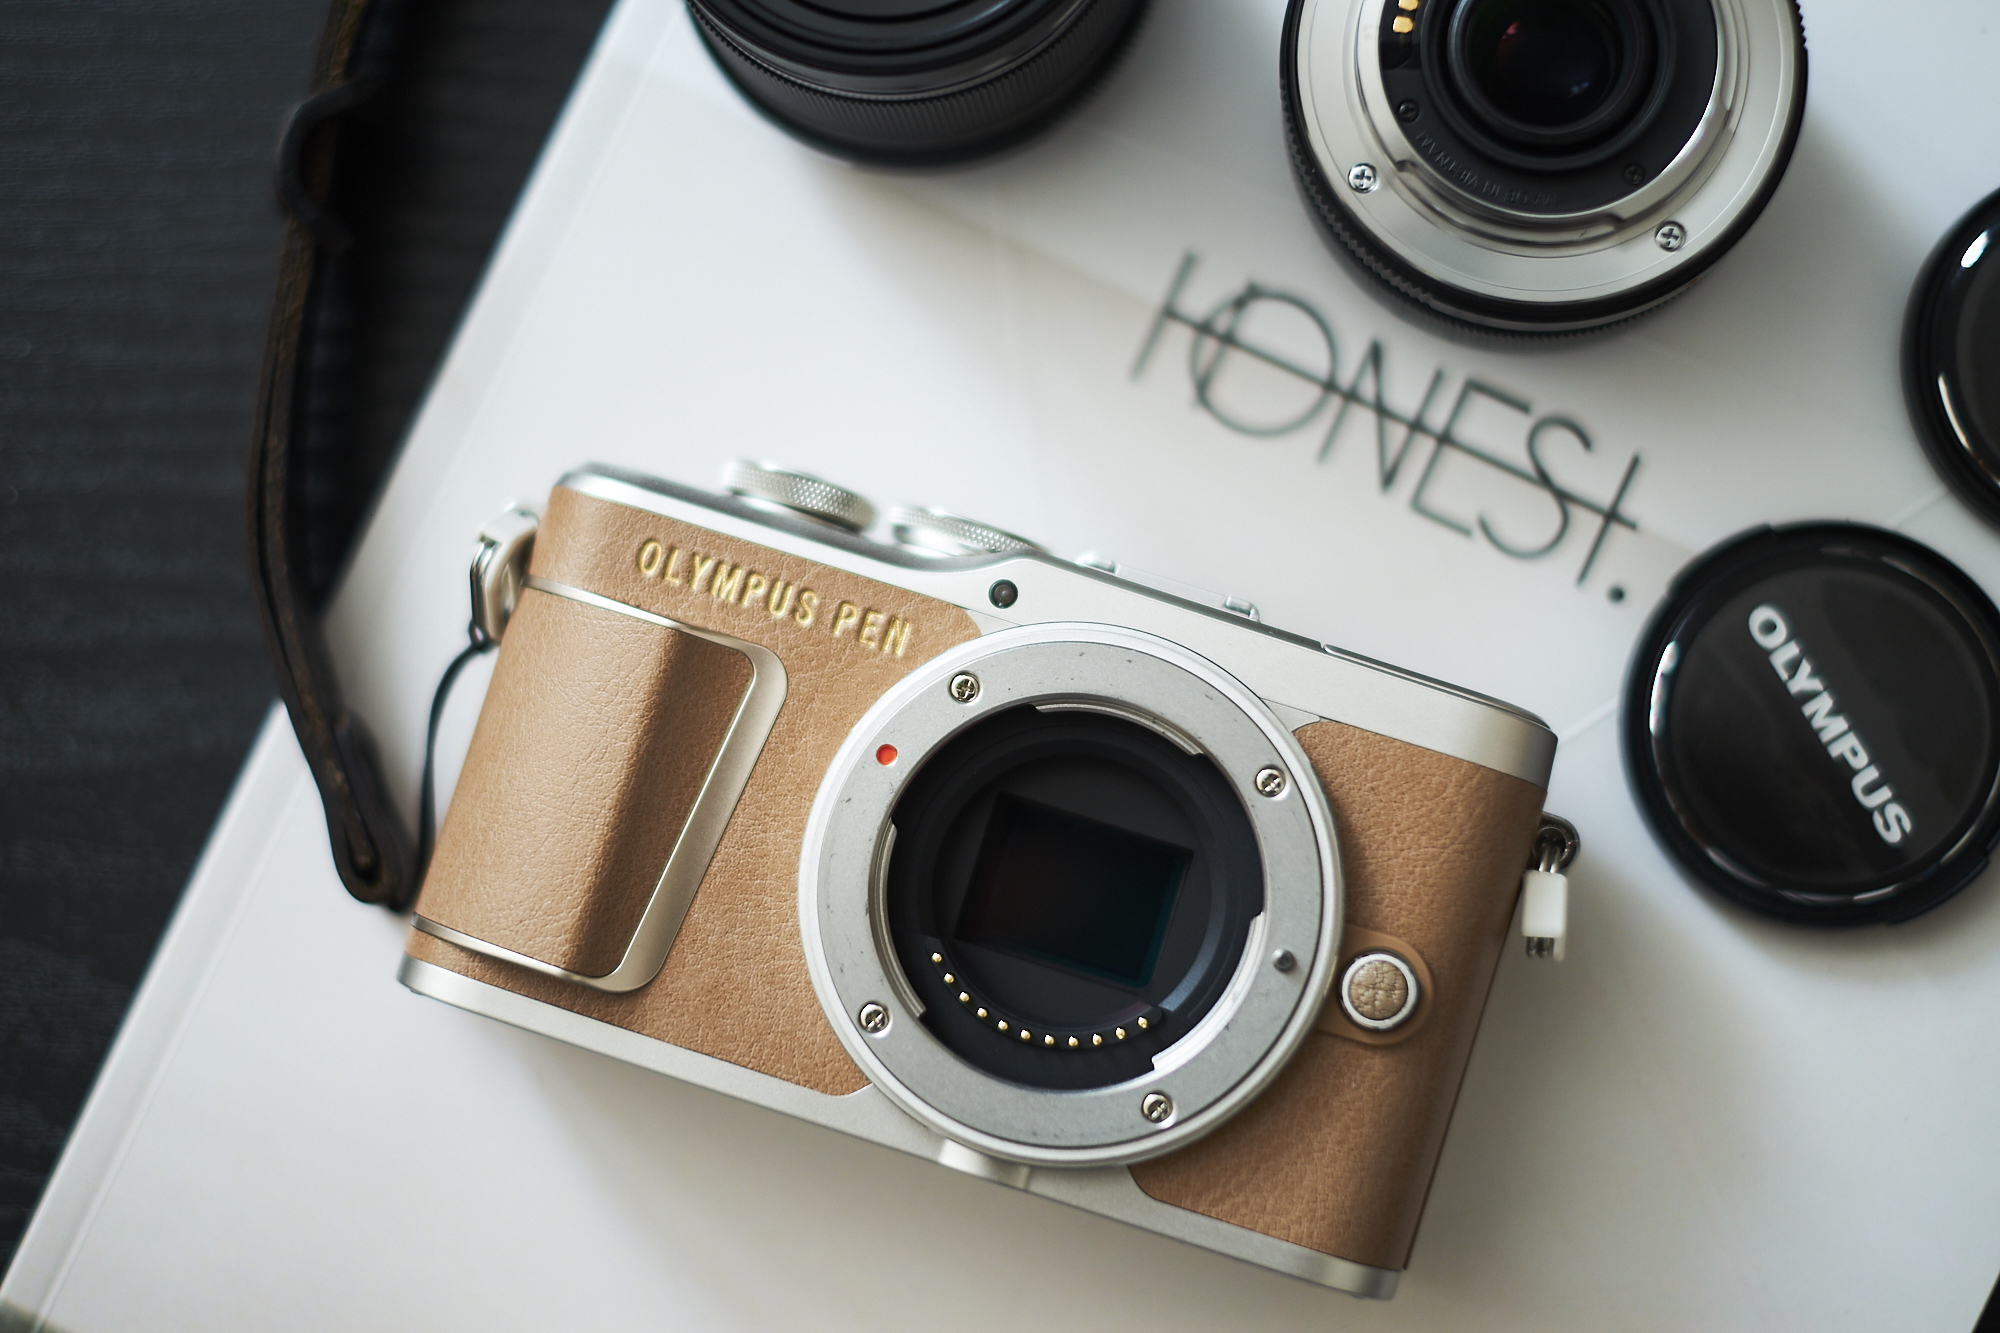 These Bargain Priced Mirrorless Cameras Are Under $600 Each!